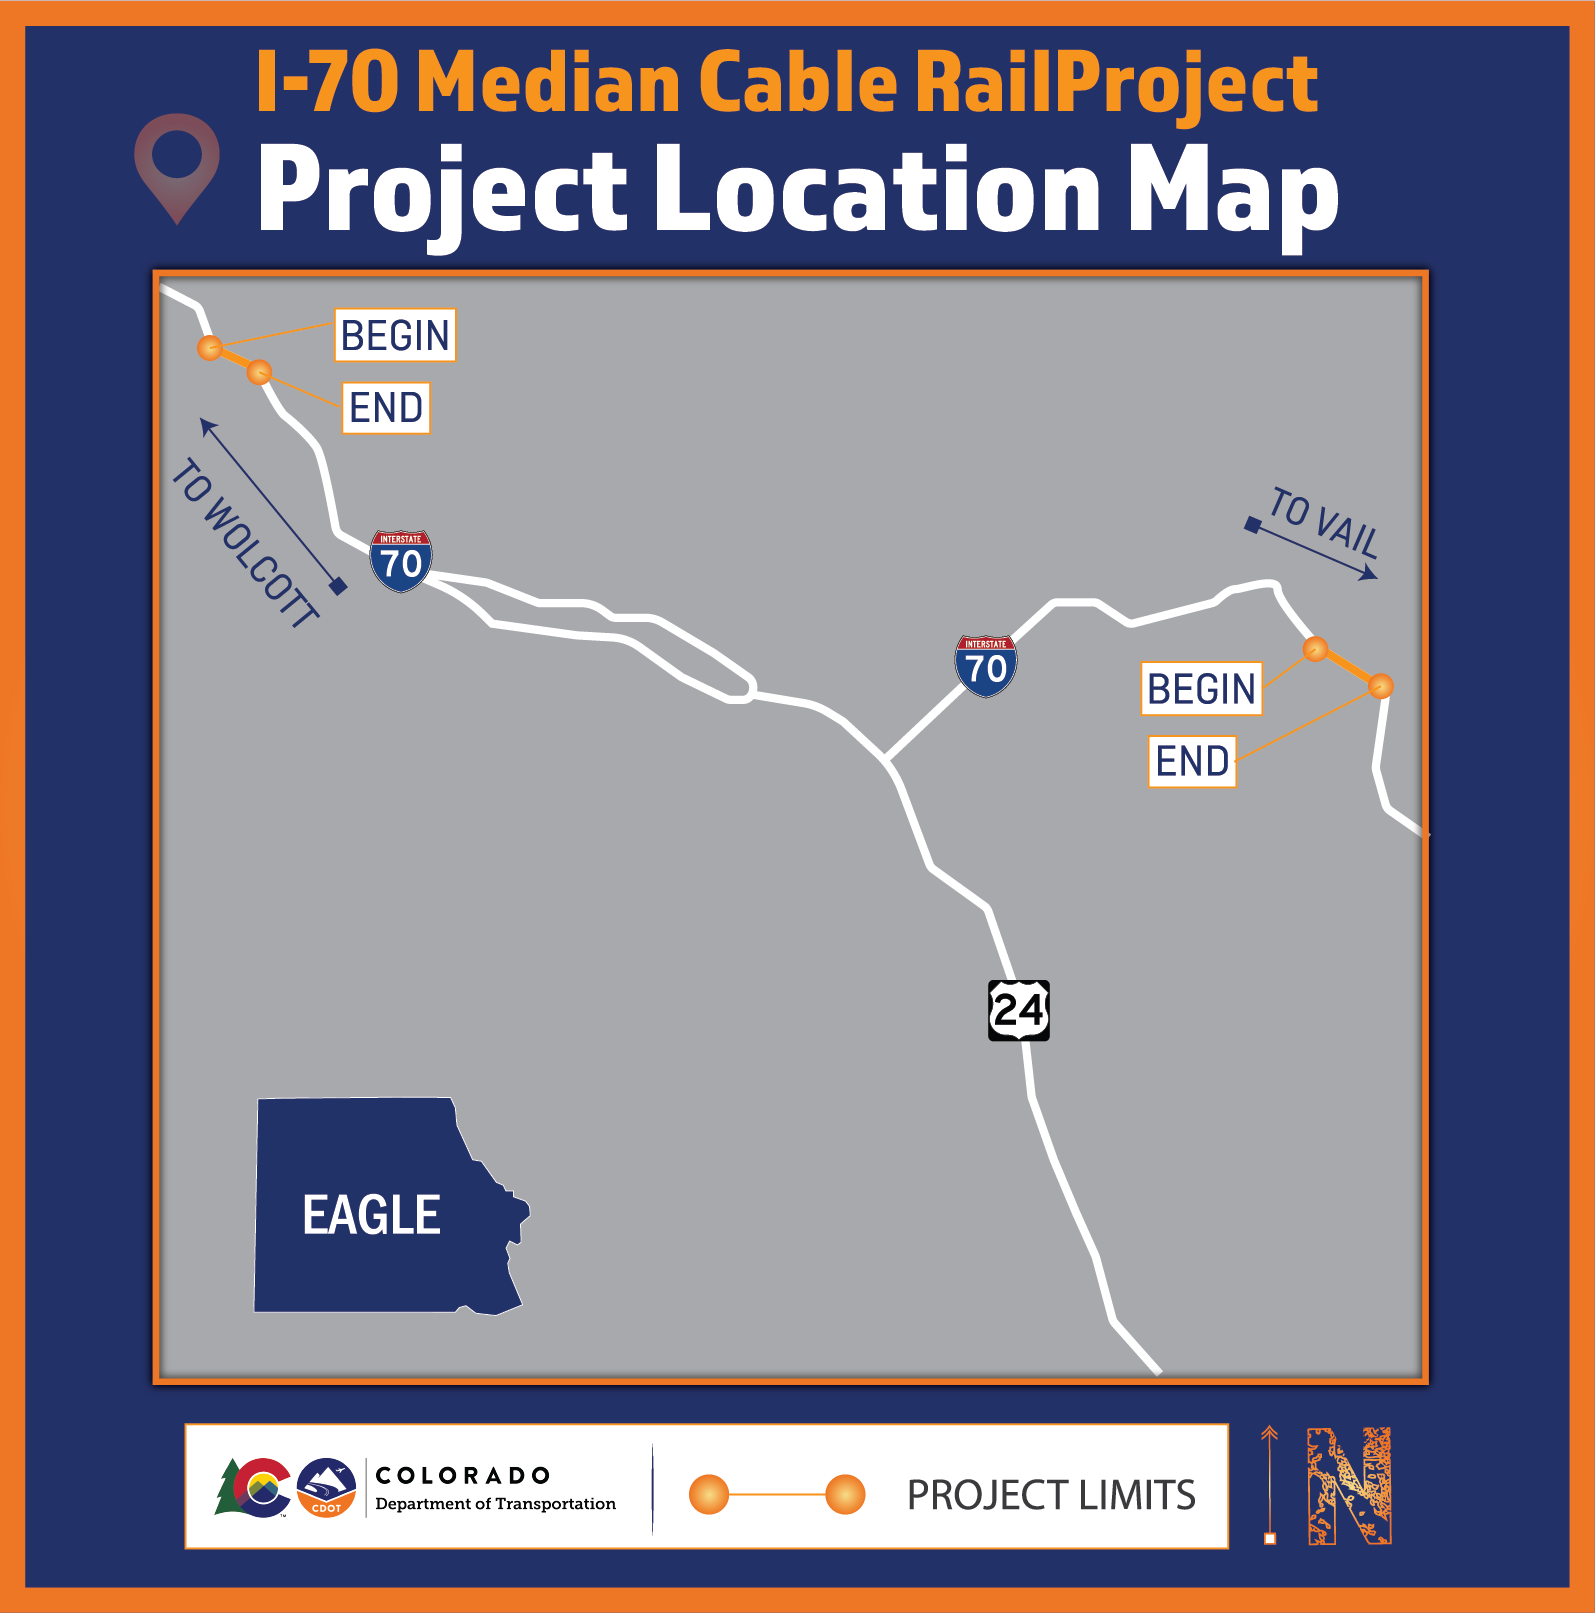 I-70 Median Cable Rail Project Location Map v1 7.11.22-01.png detail image